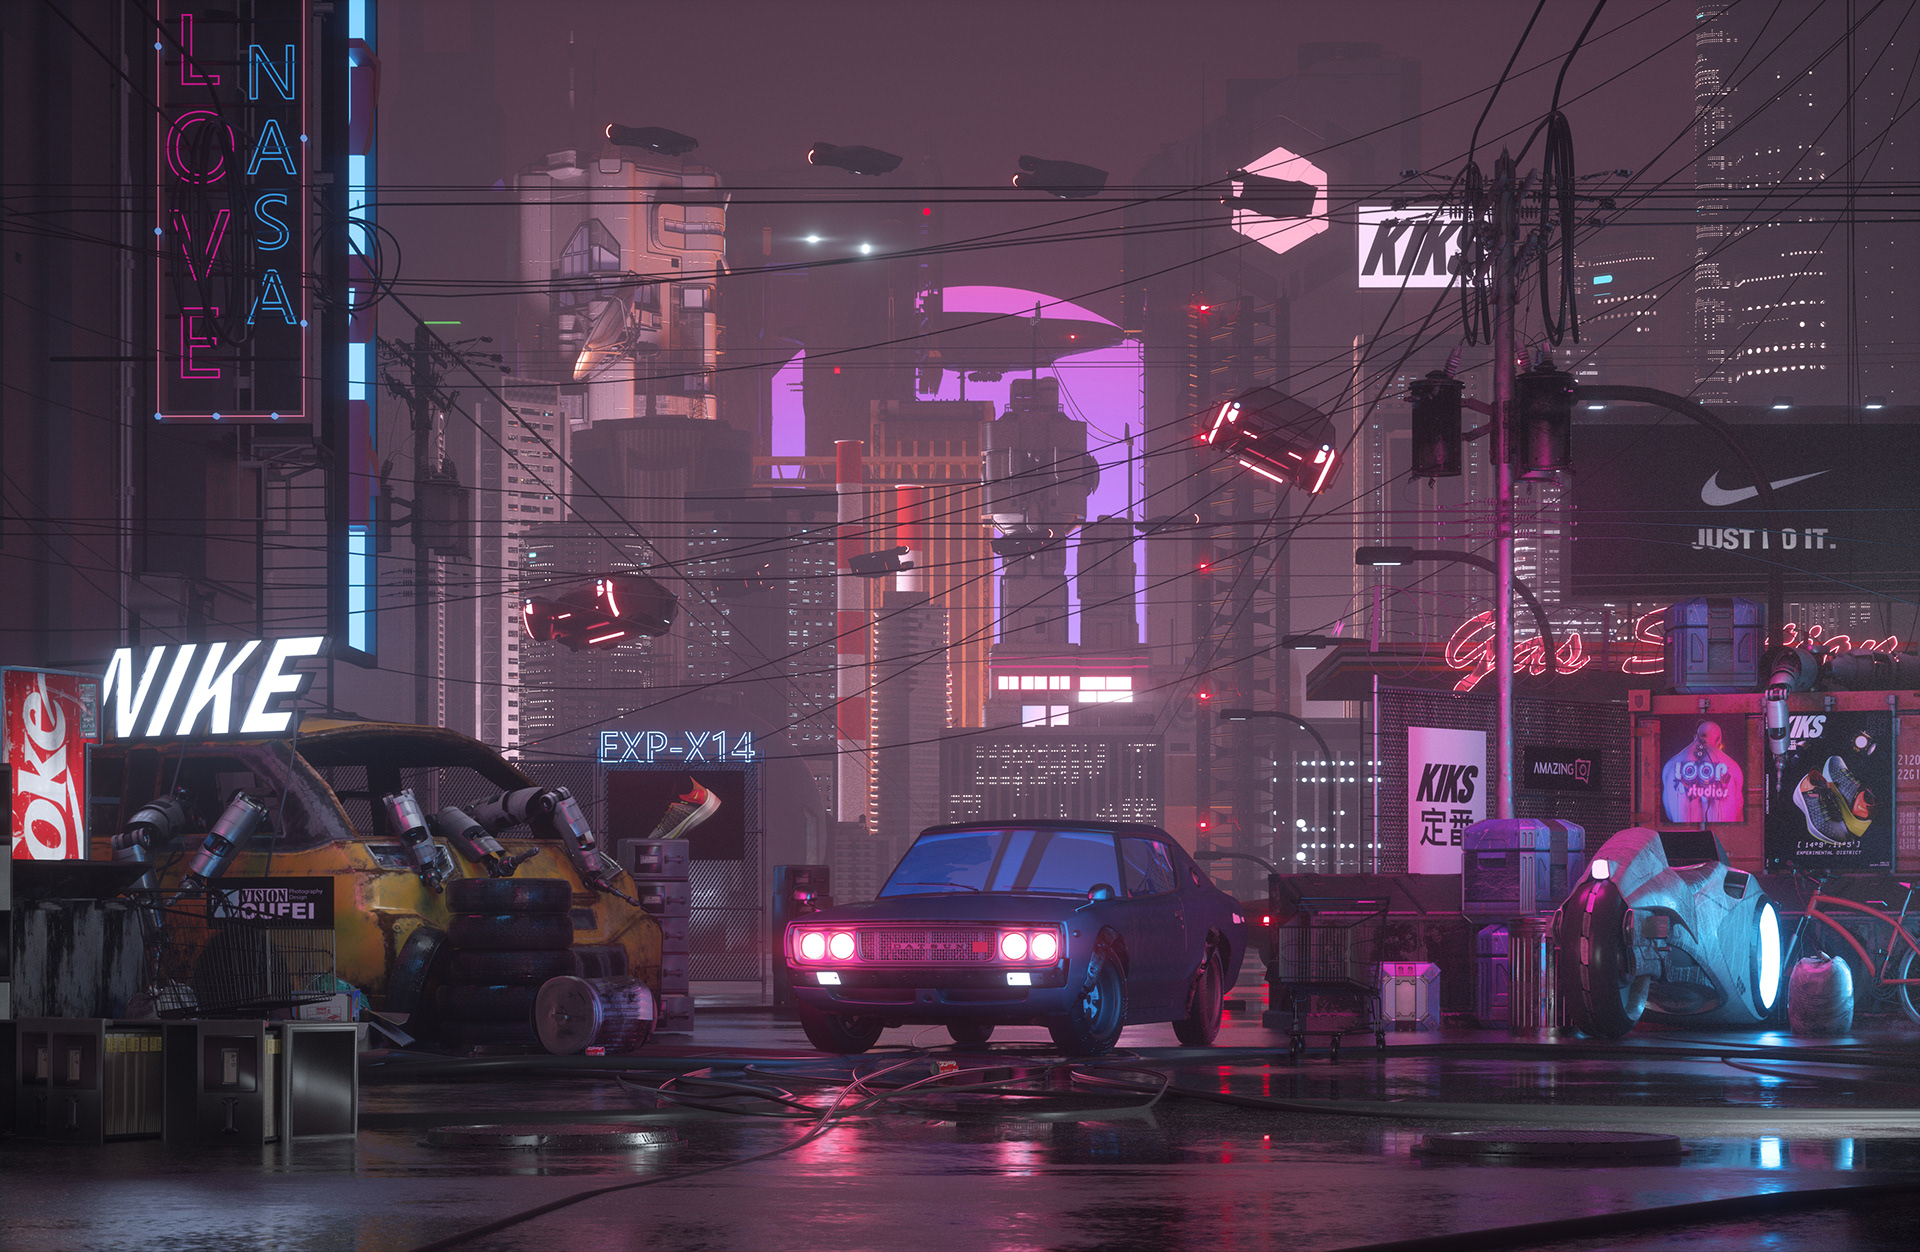 The Cyber City